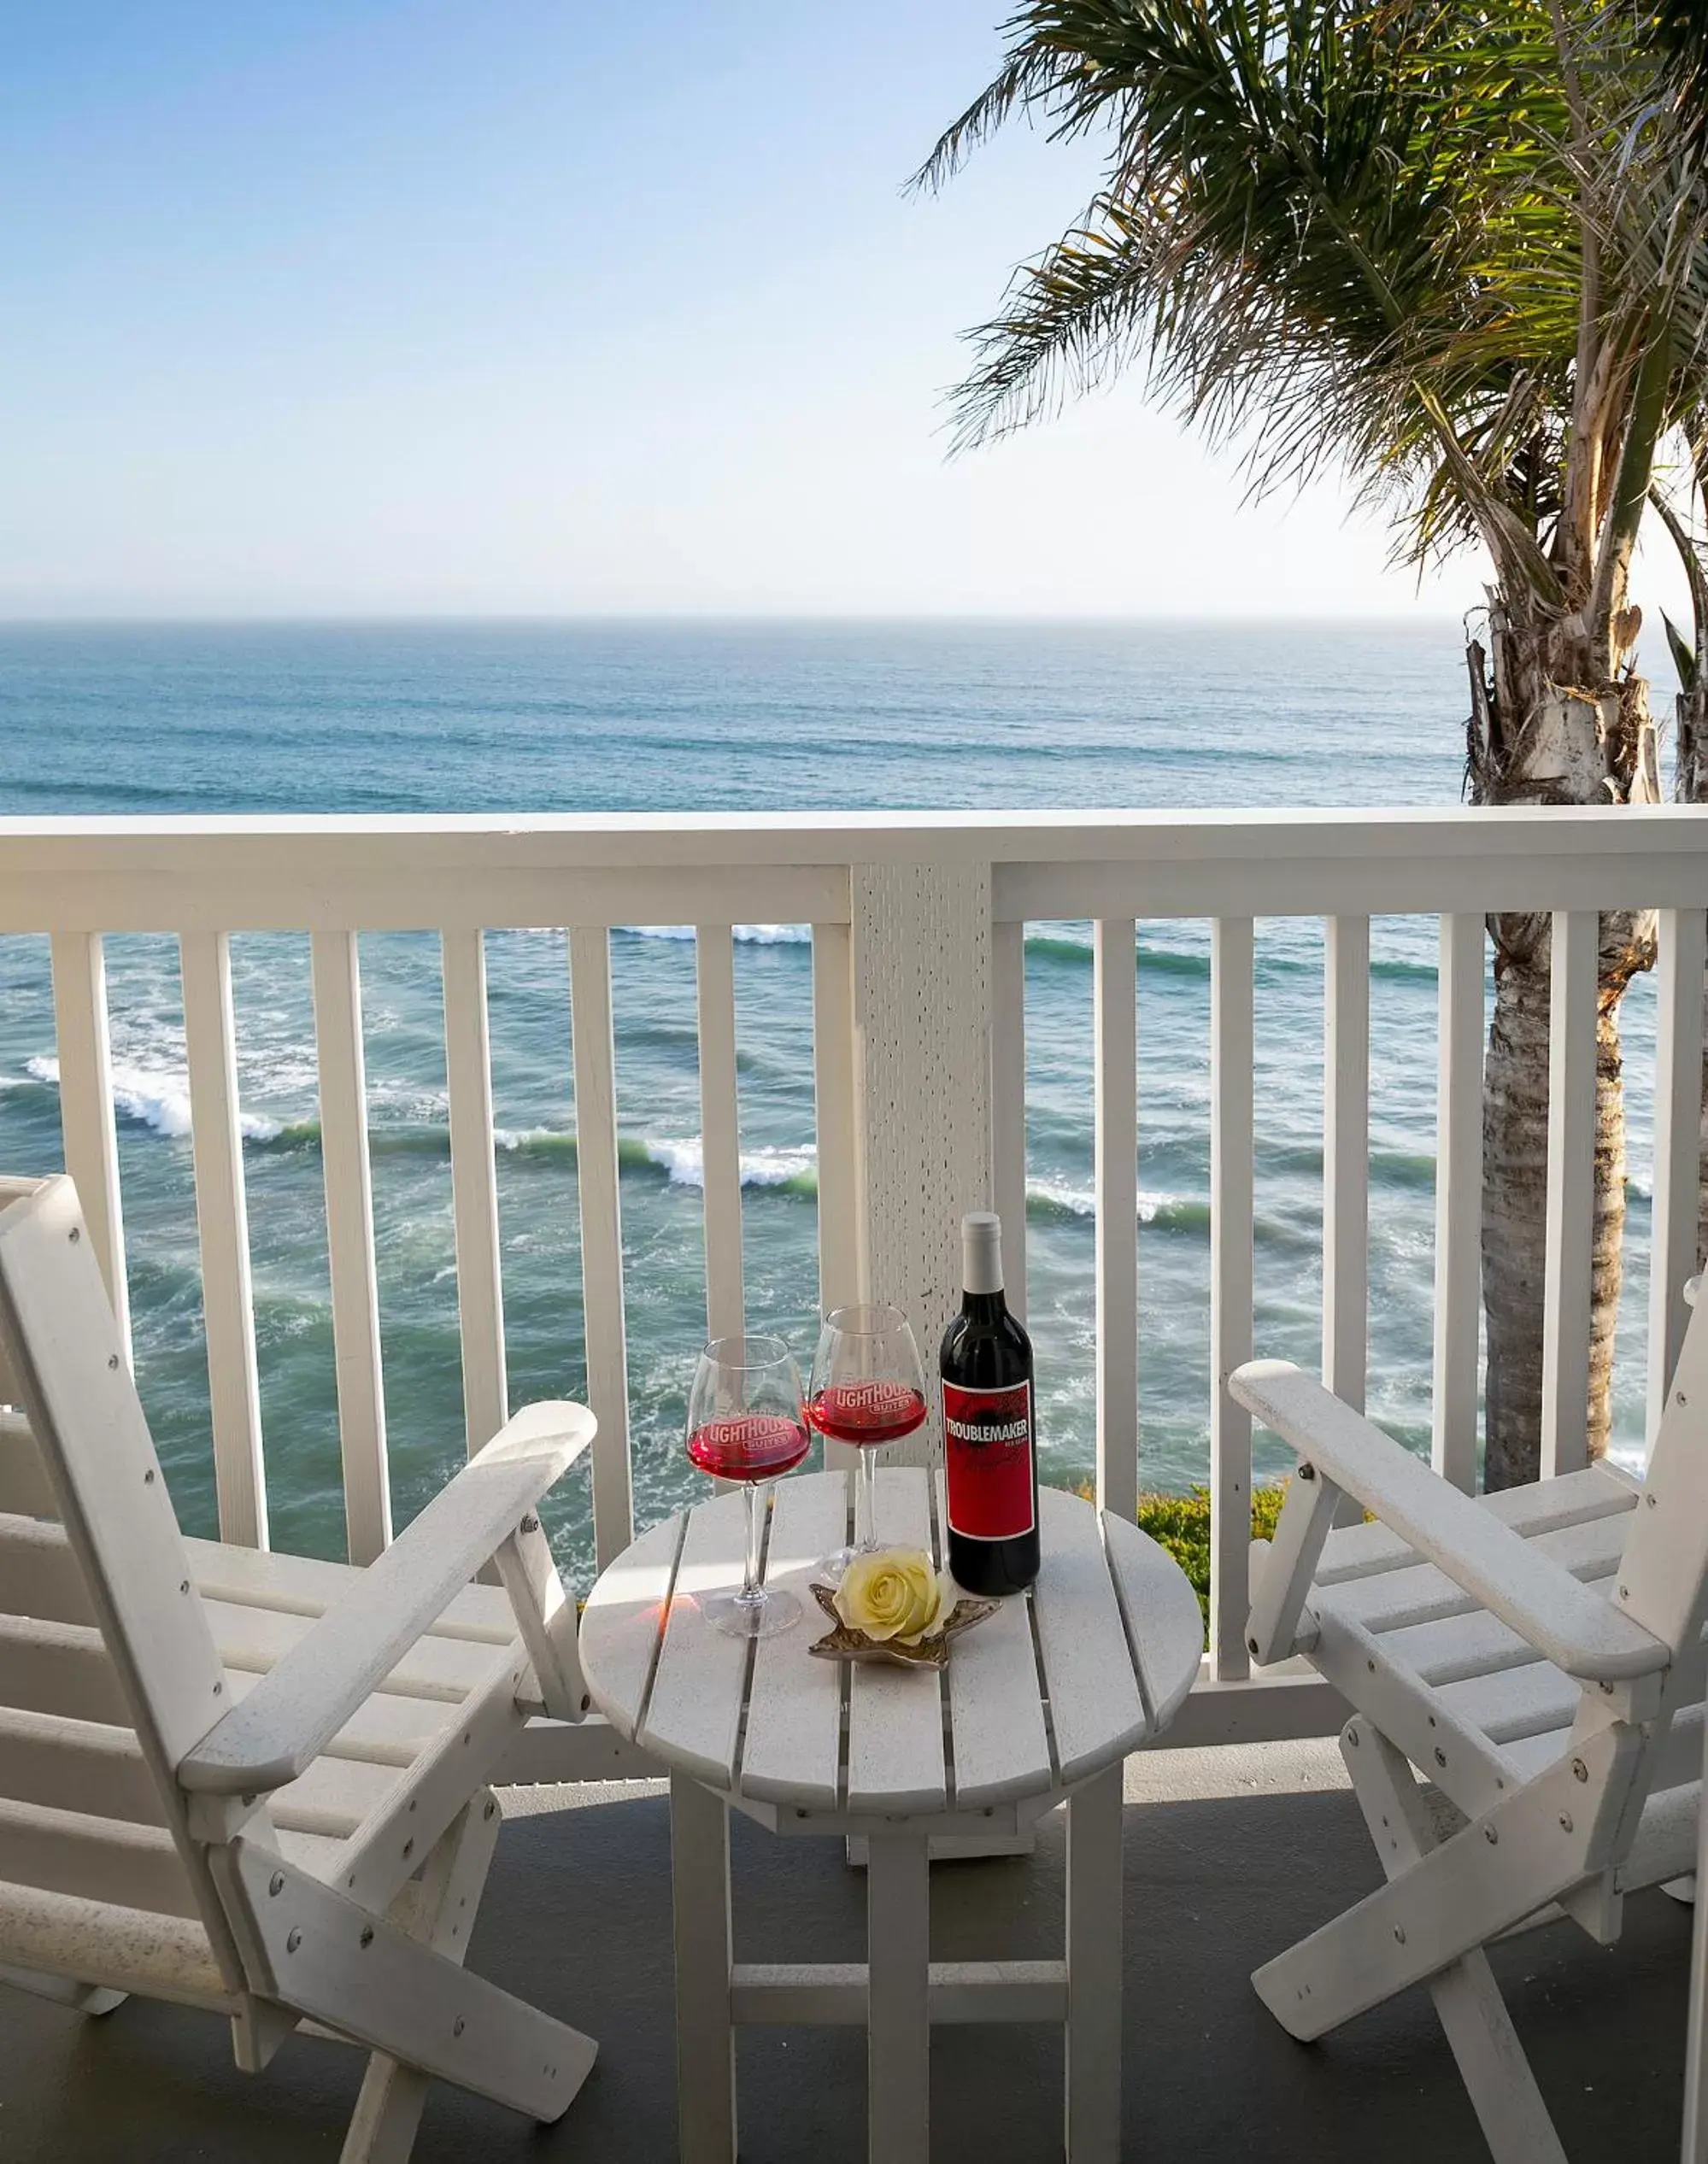 Balcony/Terrace in Pismo Lighthouse Suites